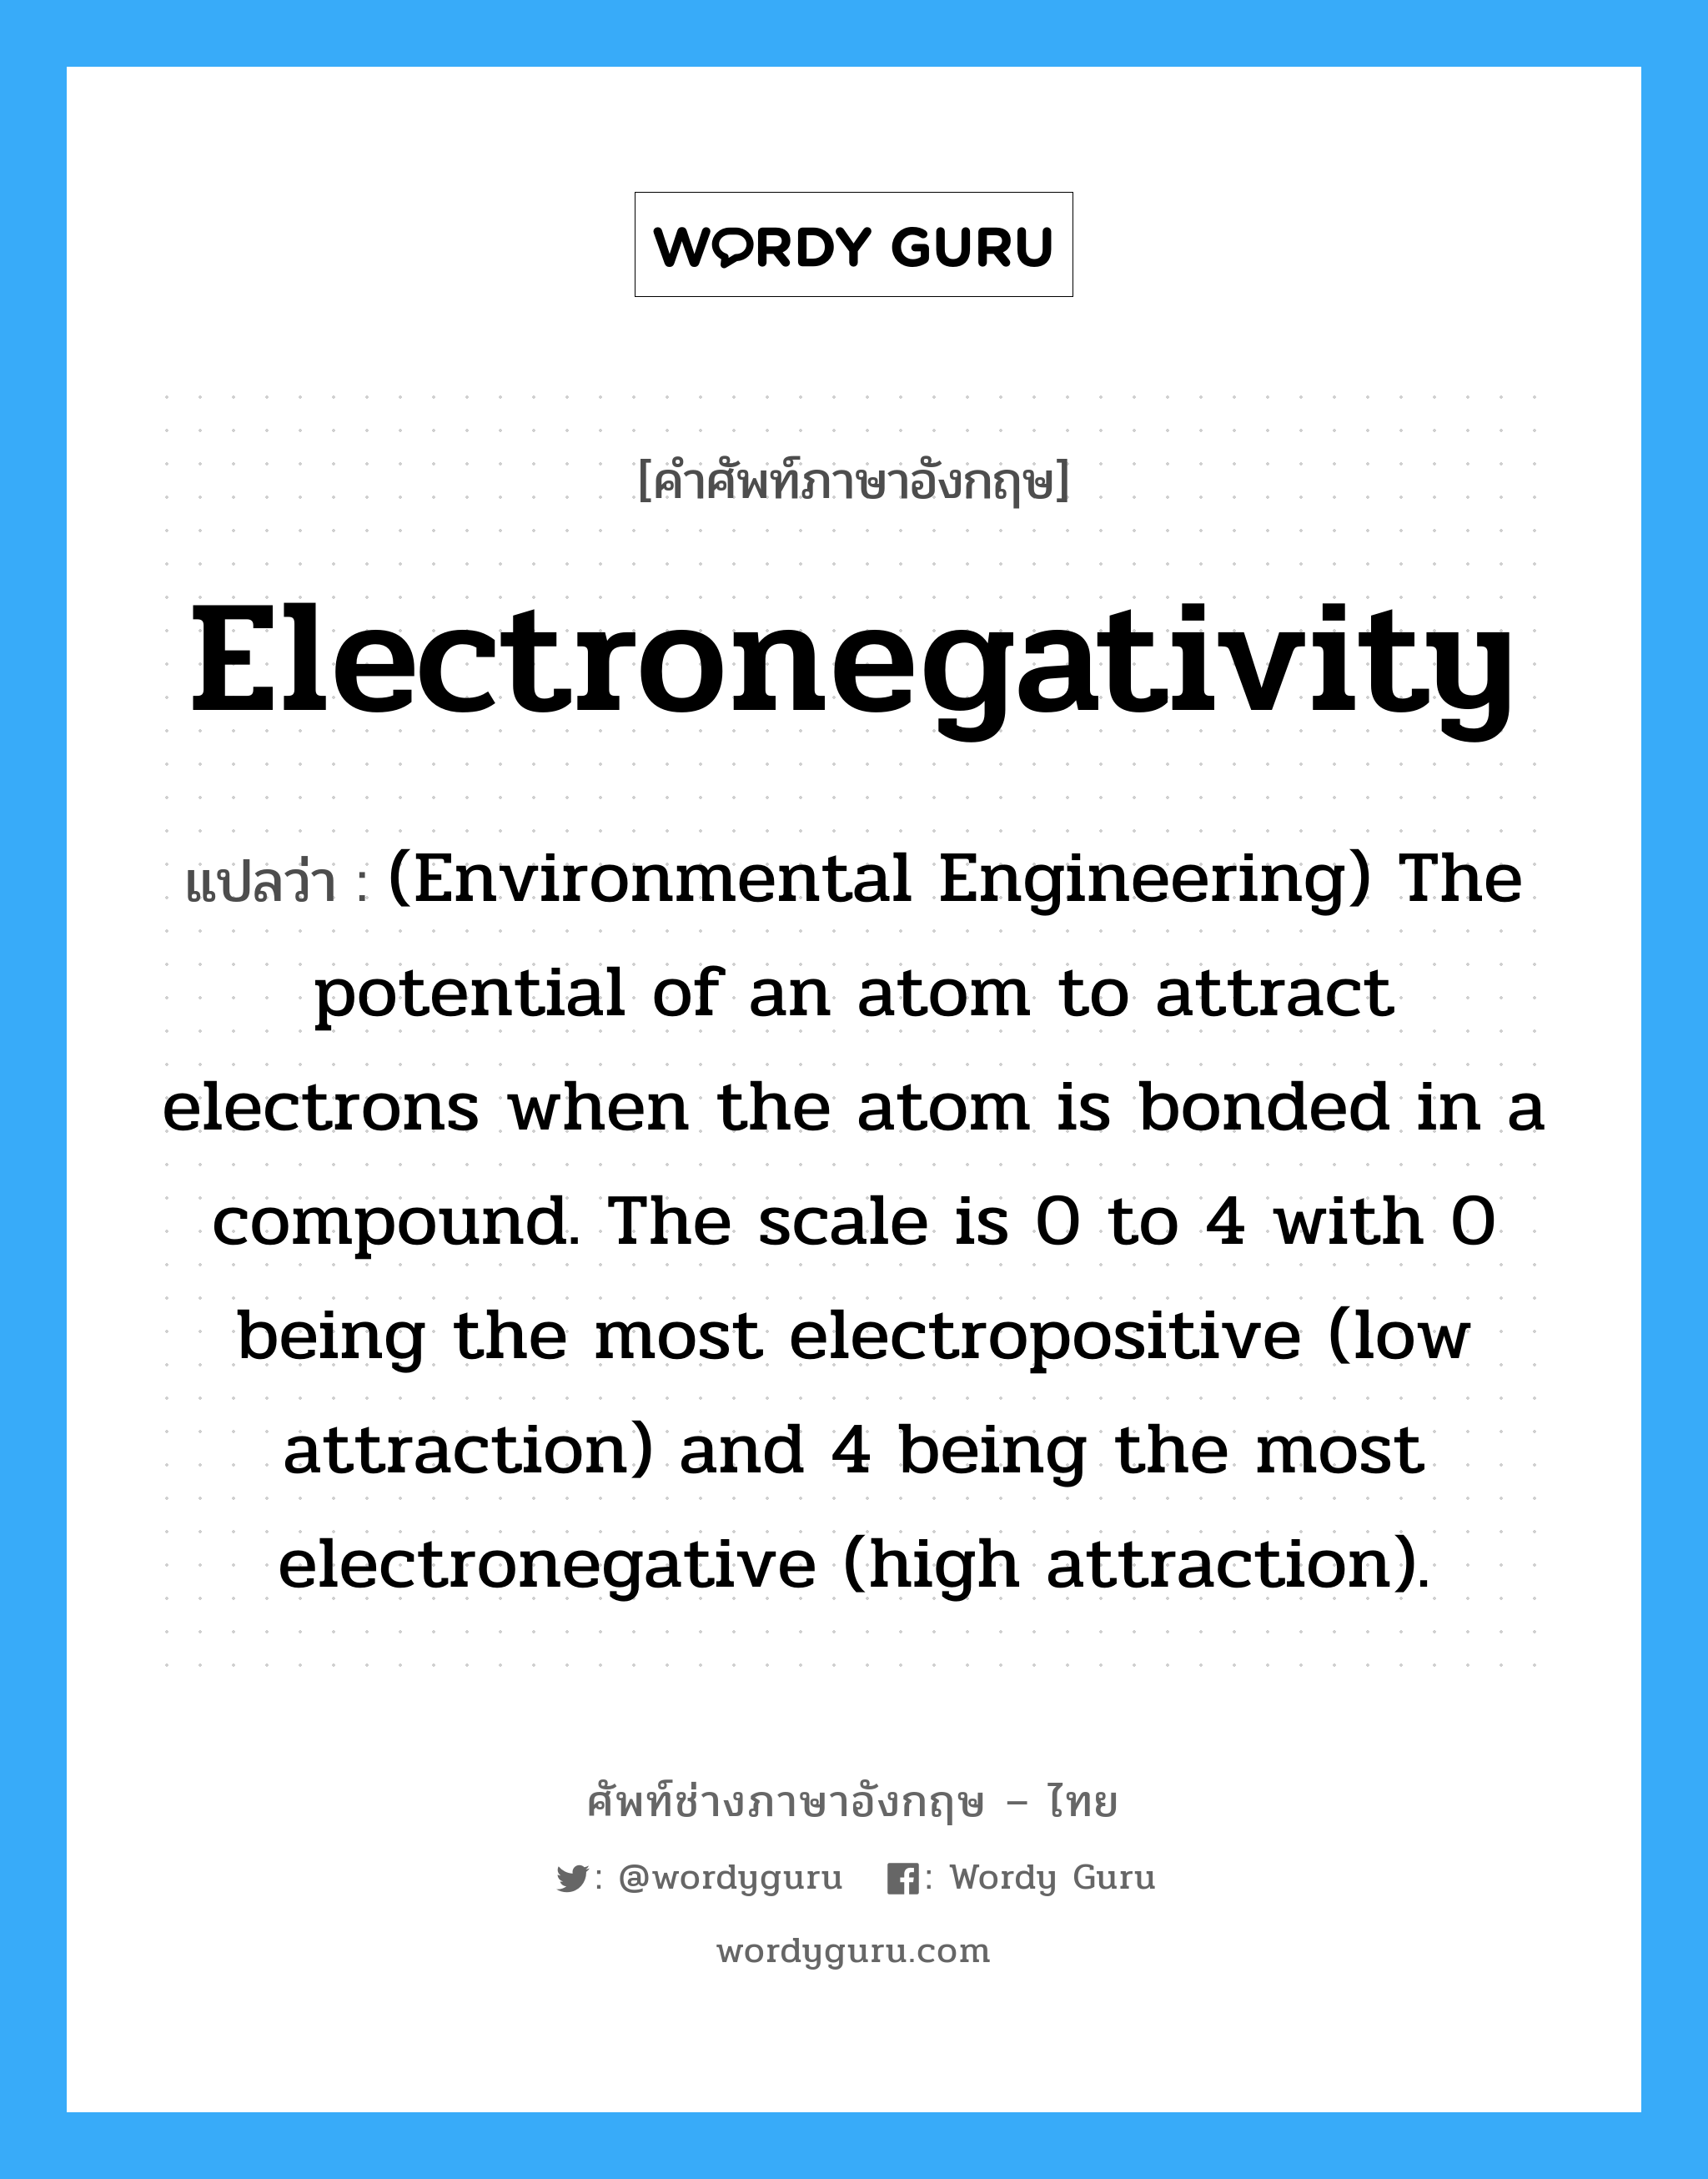 Electronegativity แปลว่า?, คำศัพท์ช่างภาษาอังกฤษ - ไทย Electronegativity คำศัพท์ภาษาอังกฤษ Electronegativity แปลว่า (Environmental Engineering) The potential of an atom to attract electrons when the atom is bonded in a compound. The scale is 0 to 4 with 0 being the most electropositive (low attraction) and 4 being the most electronegative (high attraction).